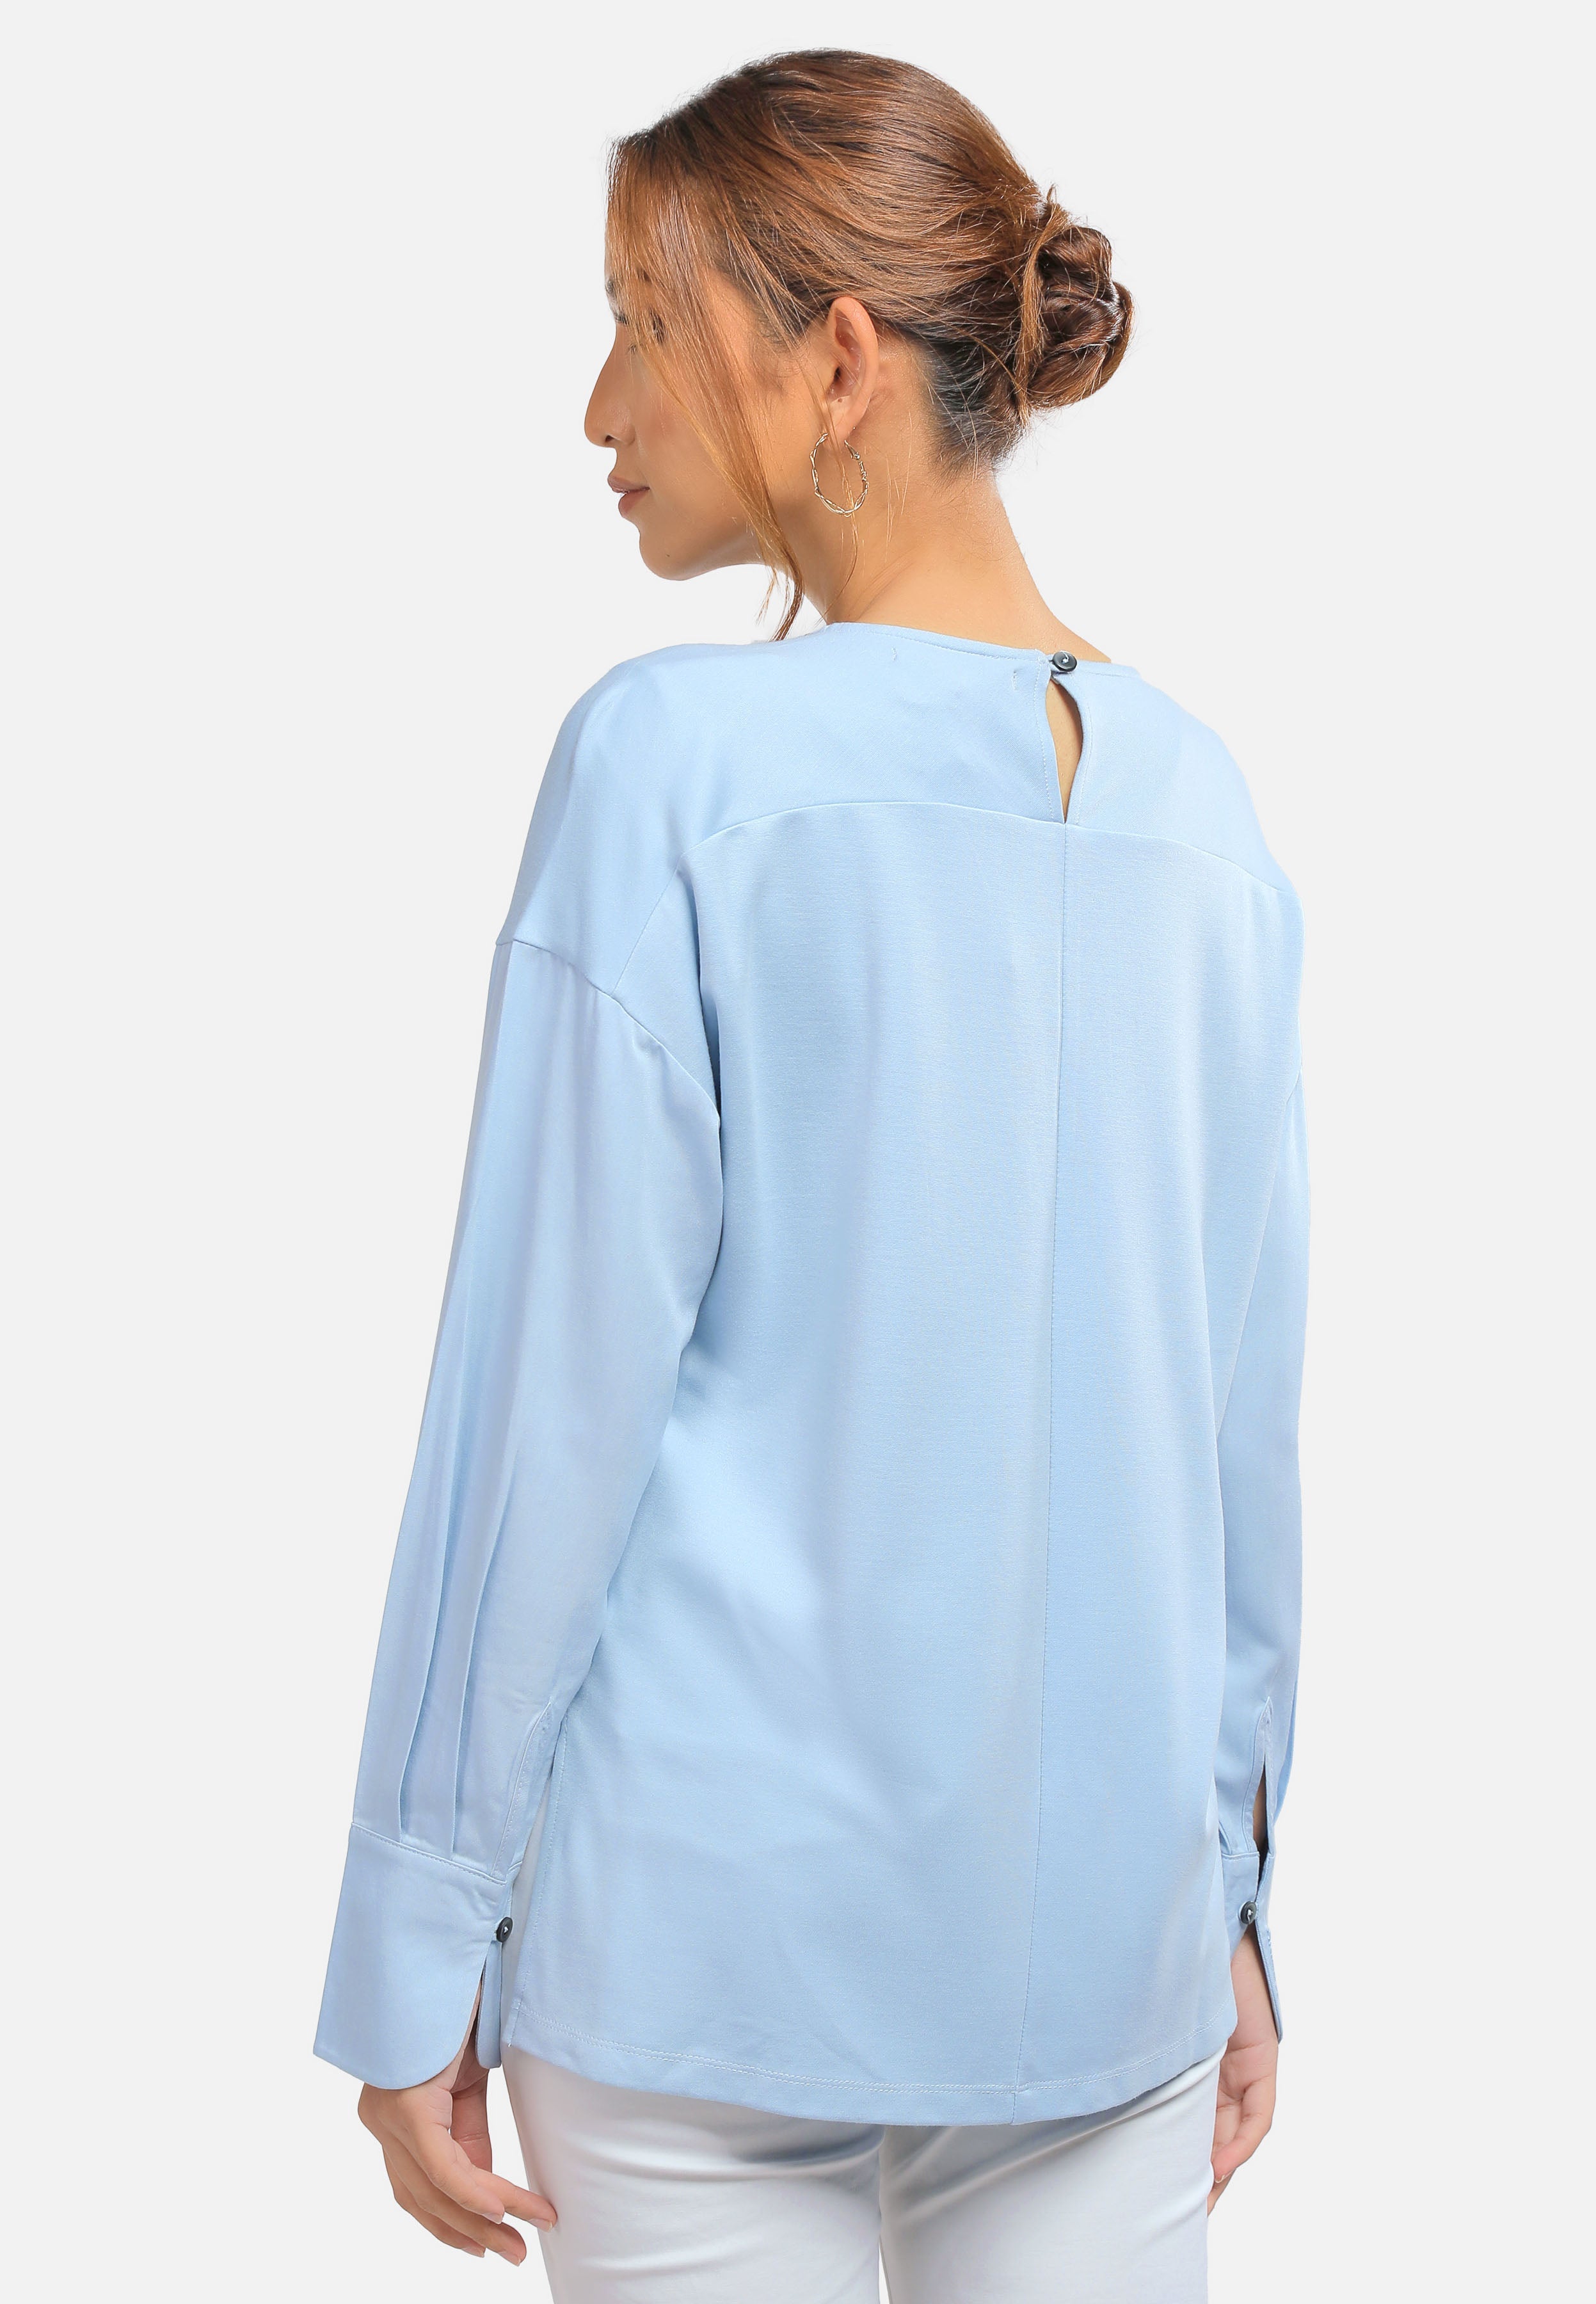 Arissa Long Sleeve Combined Tops - ARS-6770 (MD2)